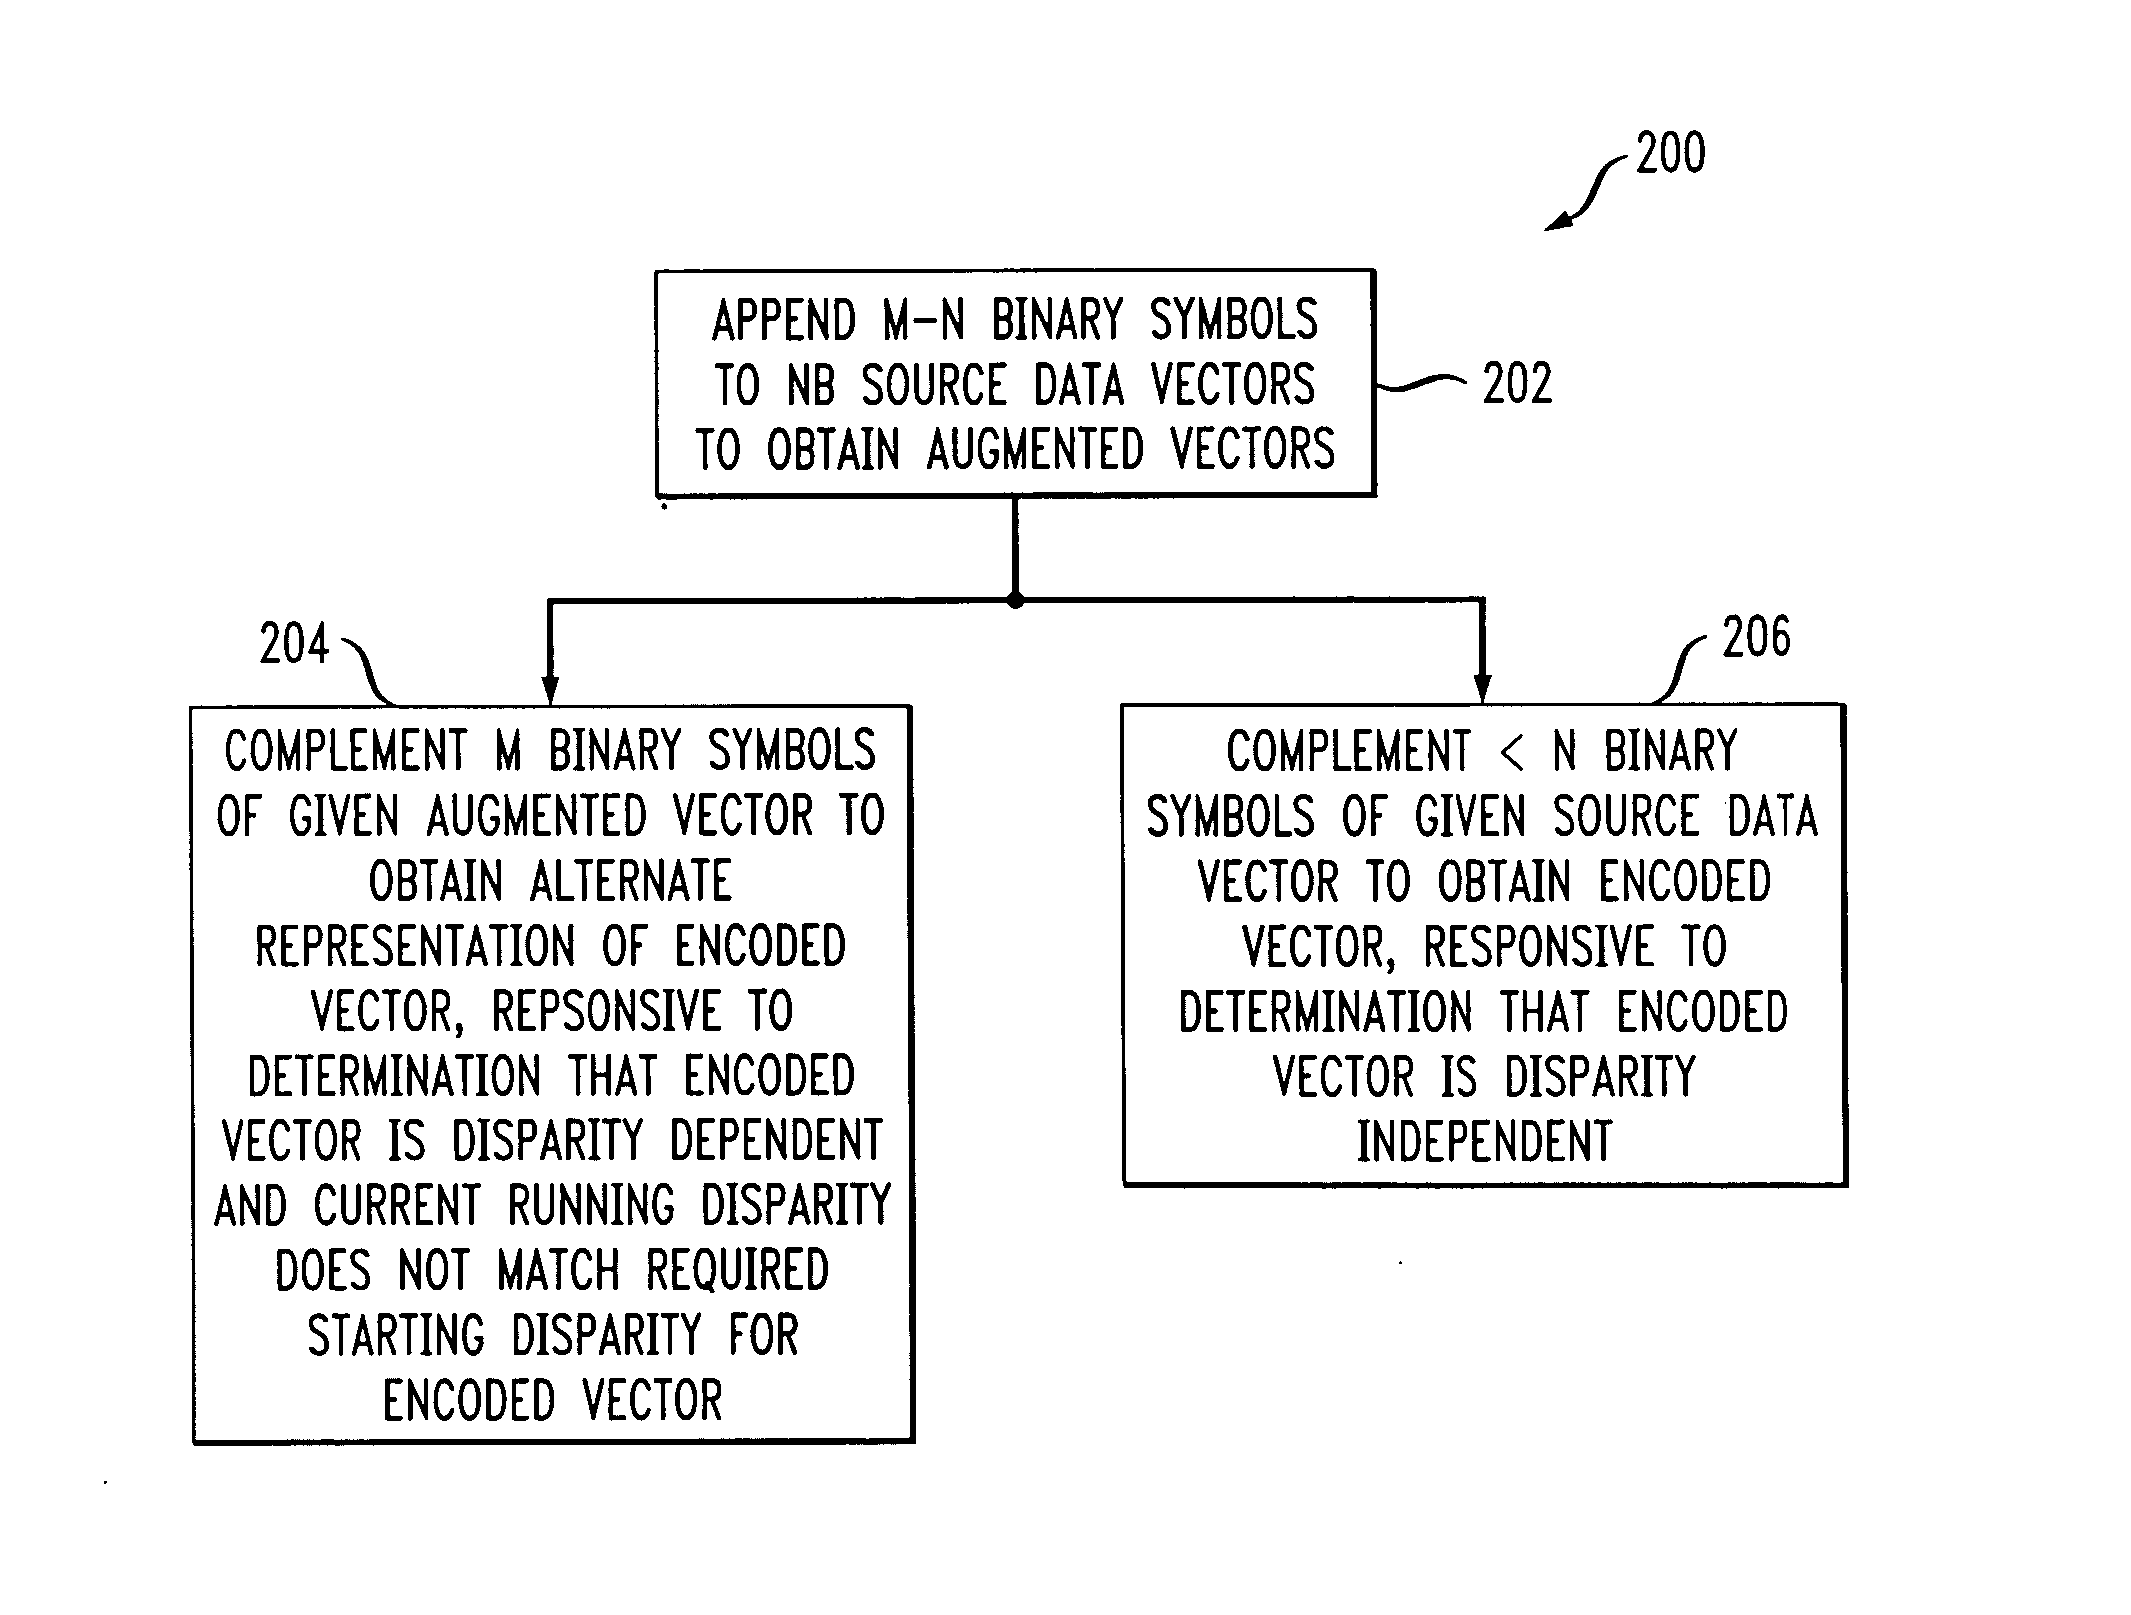 Nb/mb coding apparatus and method using both disparity independent and disparity dependent encoded vectors